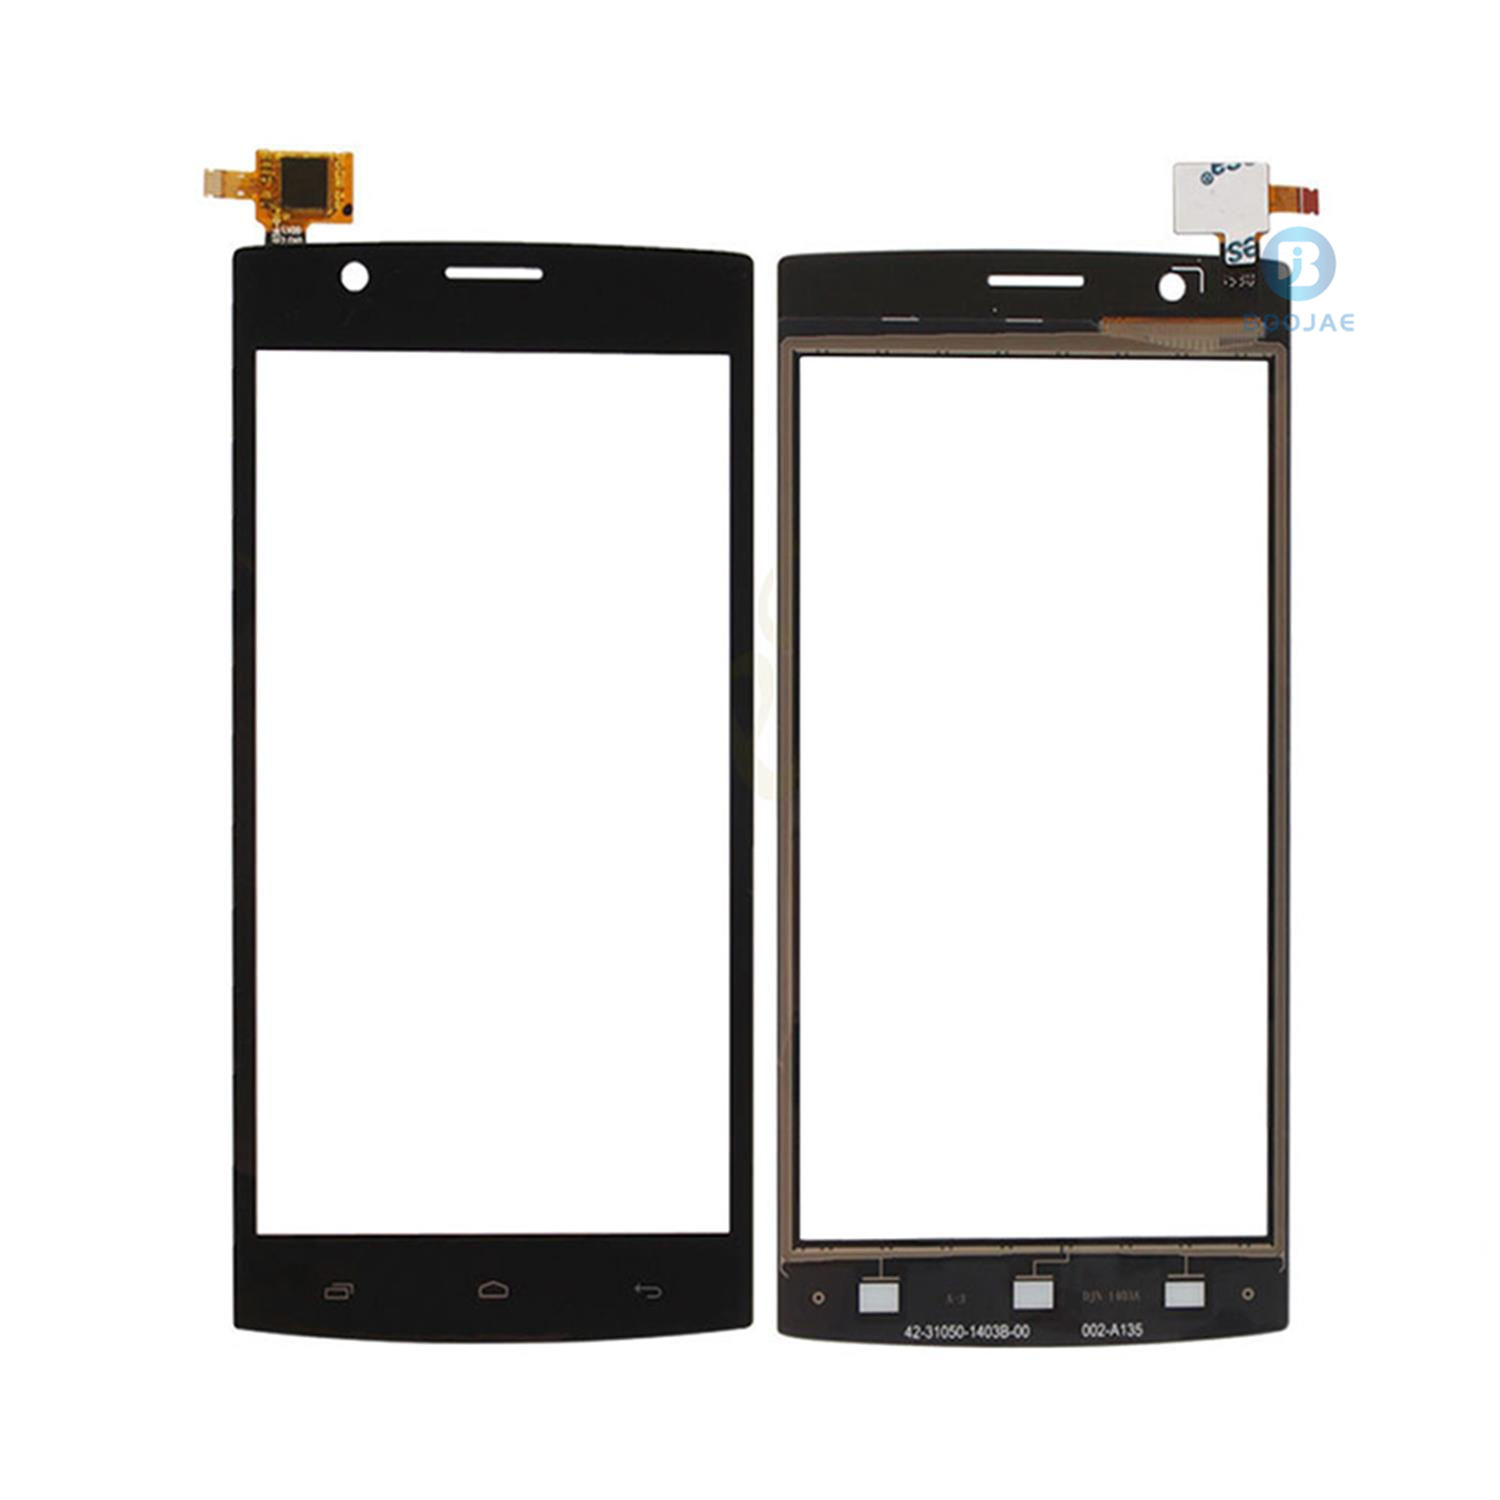 For FLY FS501 touch screen panel digitizer